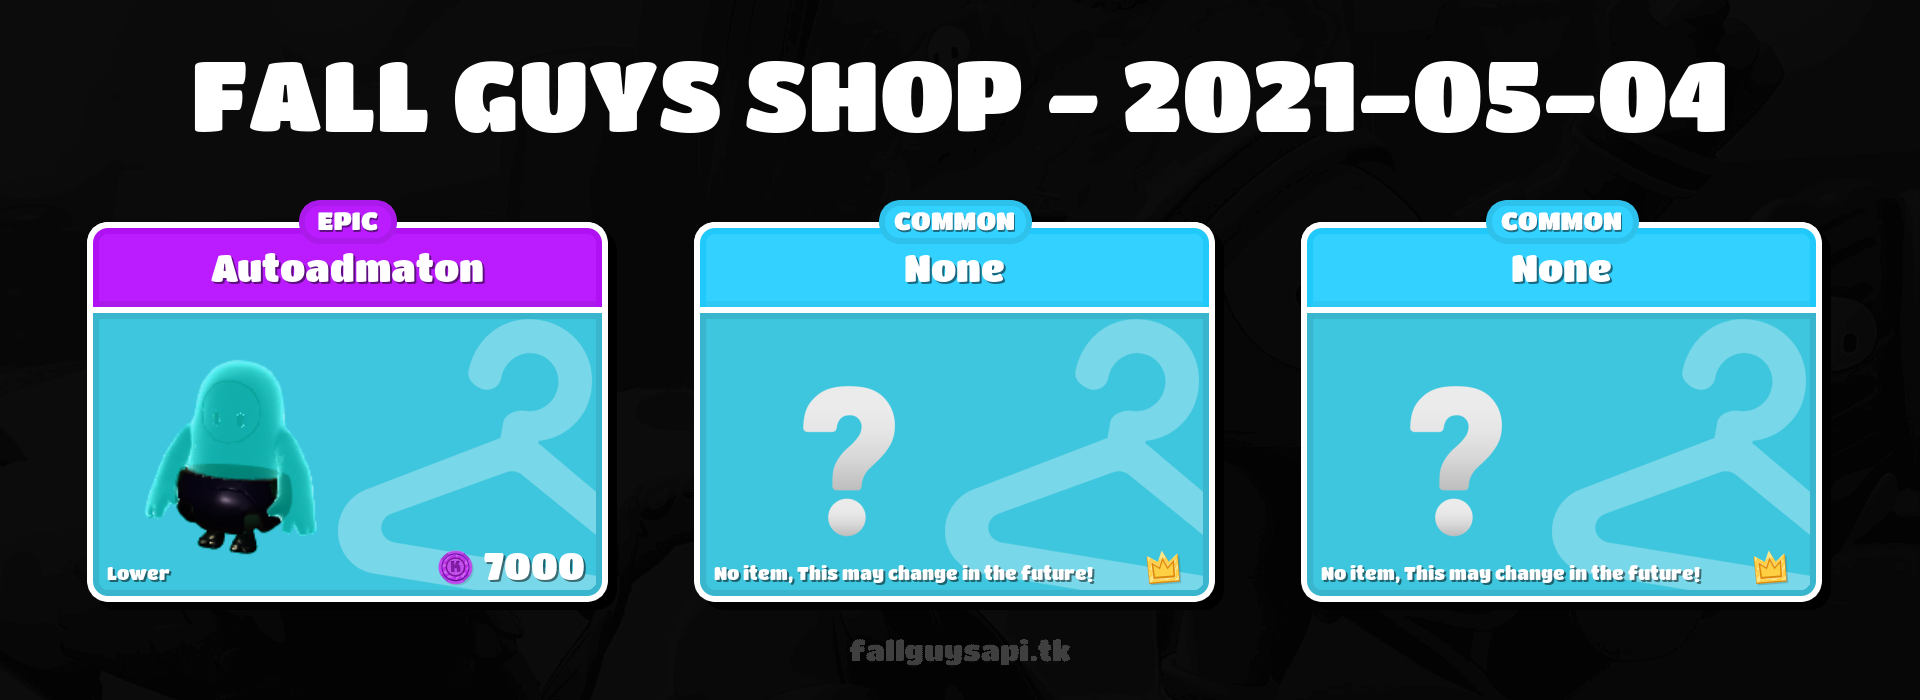 Fall Guys: Ultimate Knockout - [S4] Featured shop - What's on sale? - May 04 - May 06